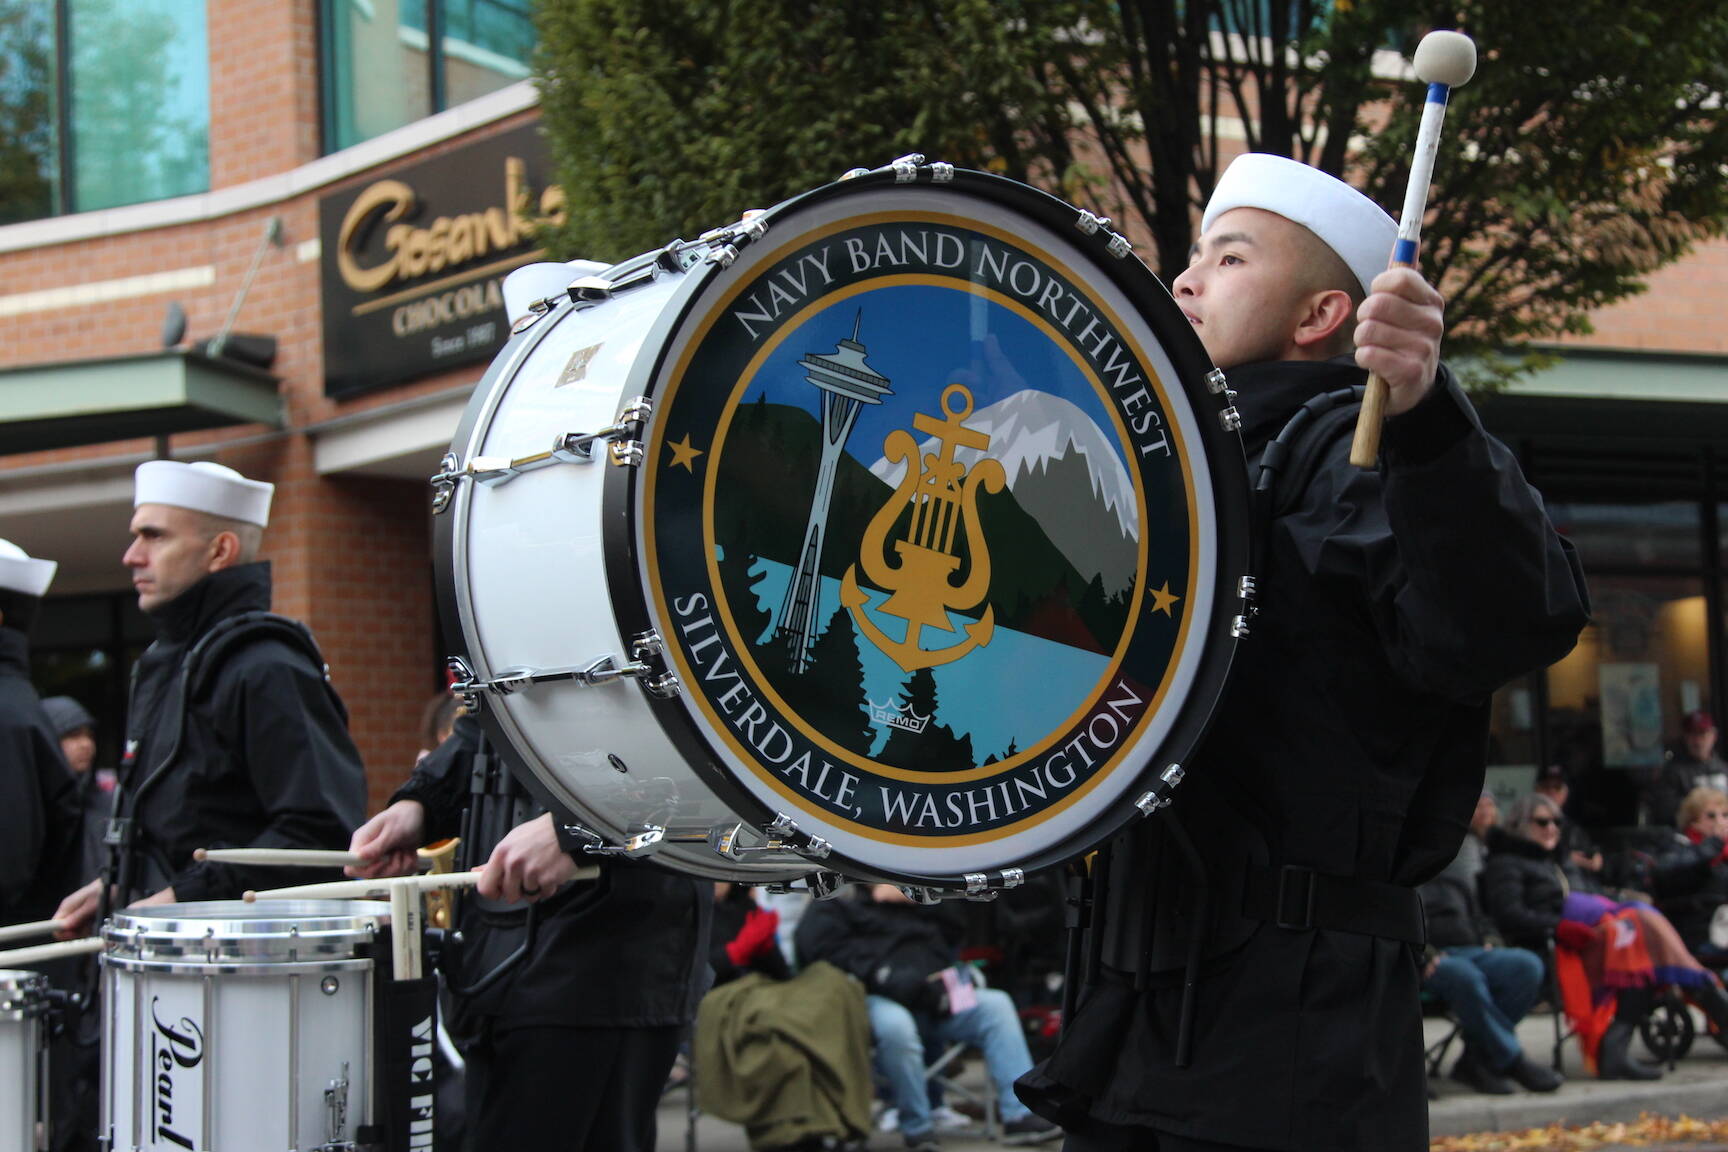 The Navy Band of the Northwest keeps the beat of the parade lively. Photo courtesy of the City of Auburn